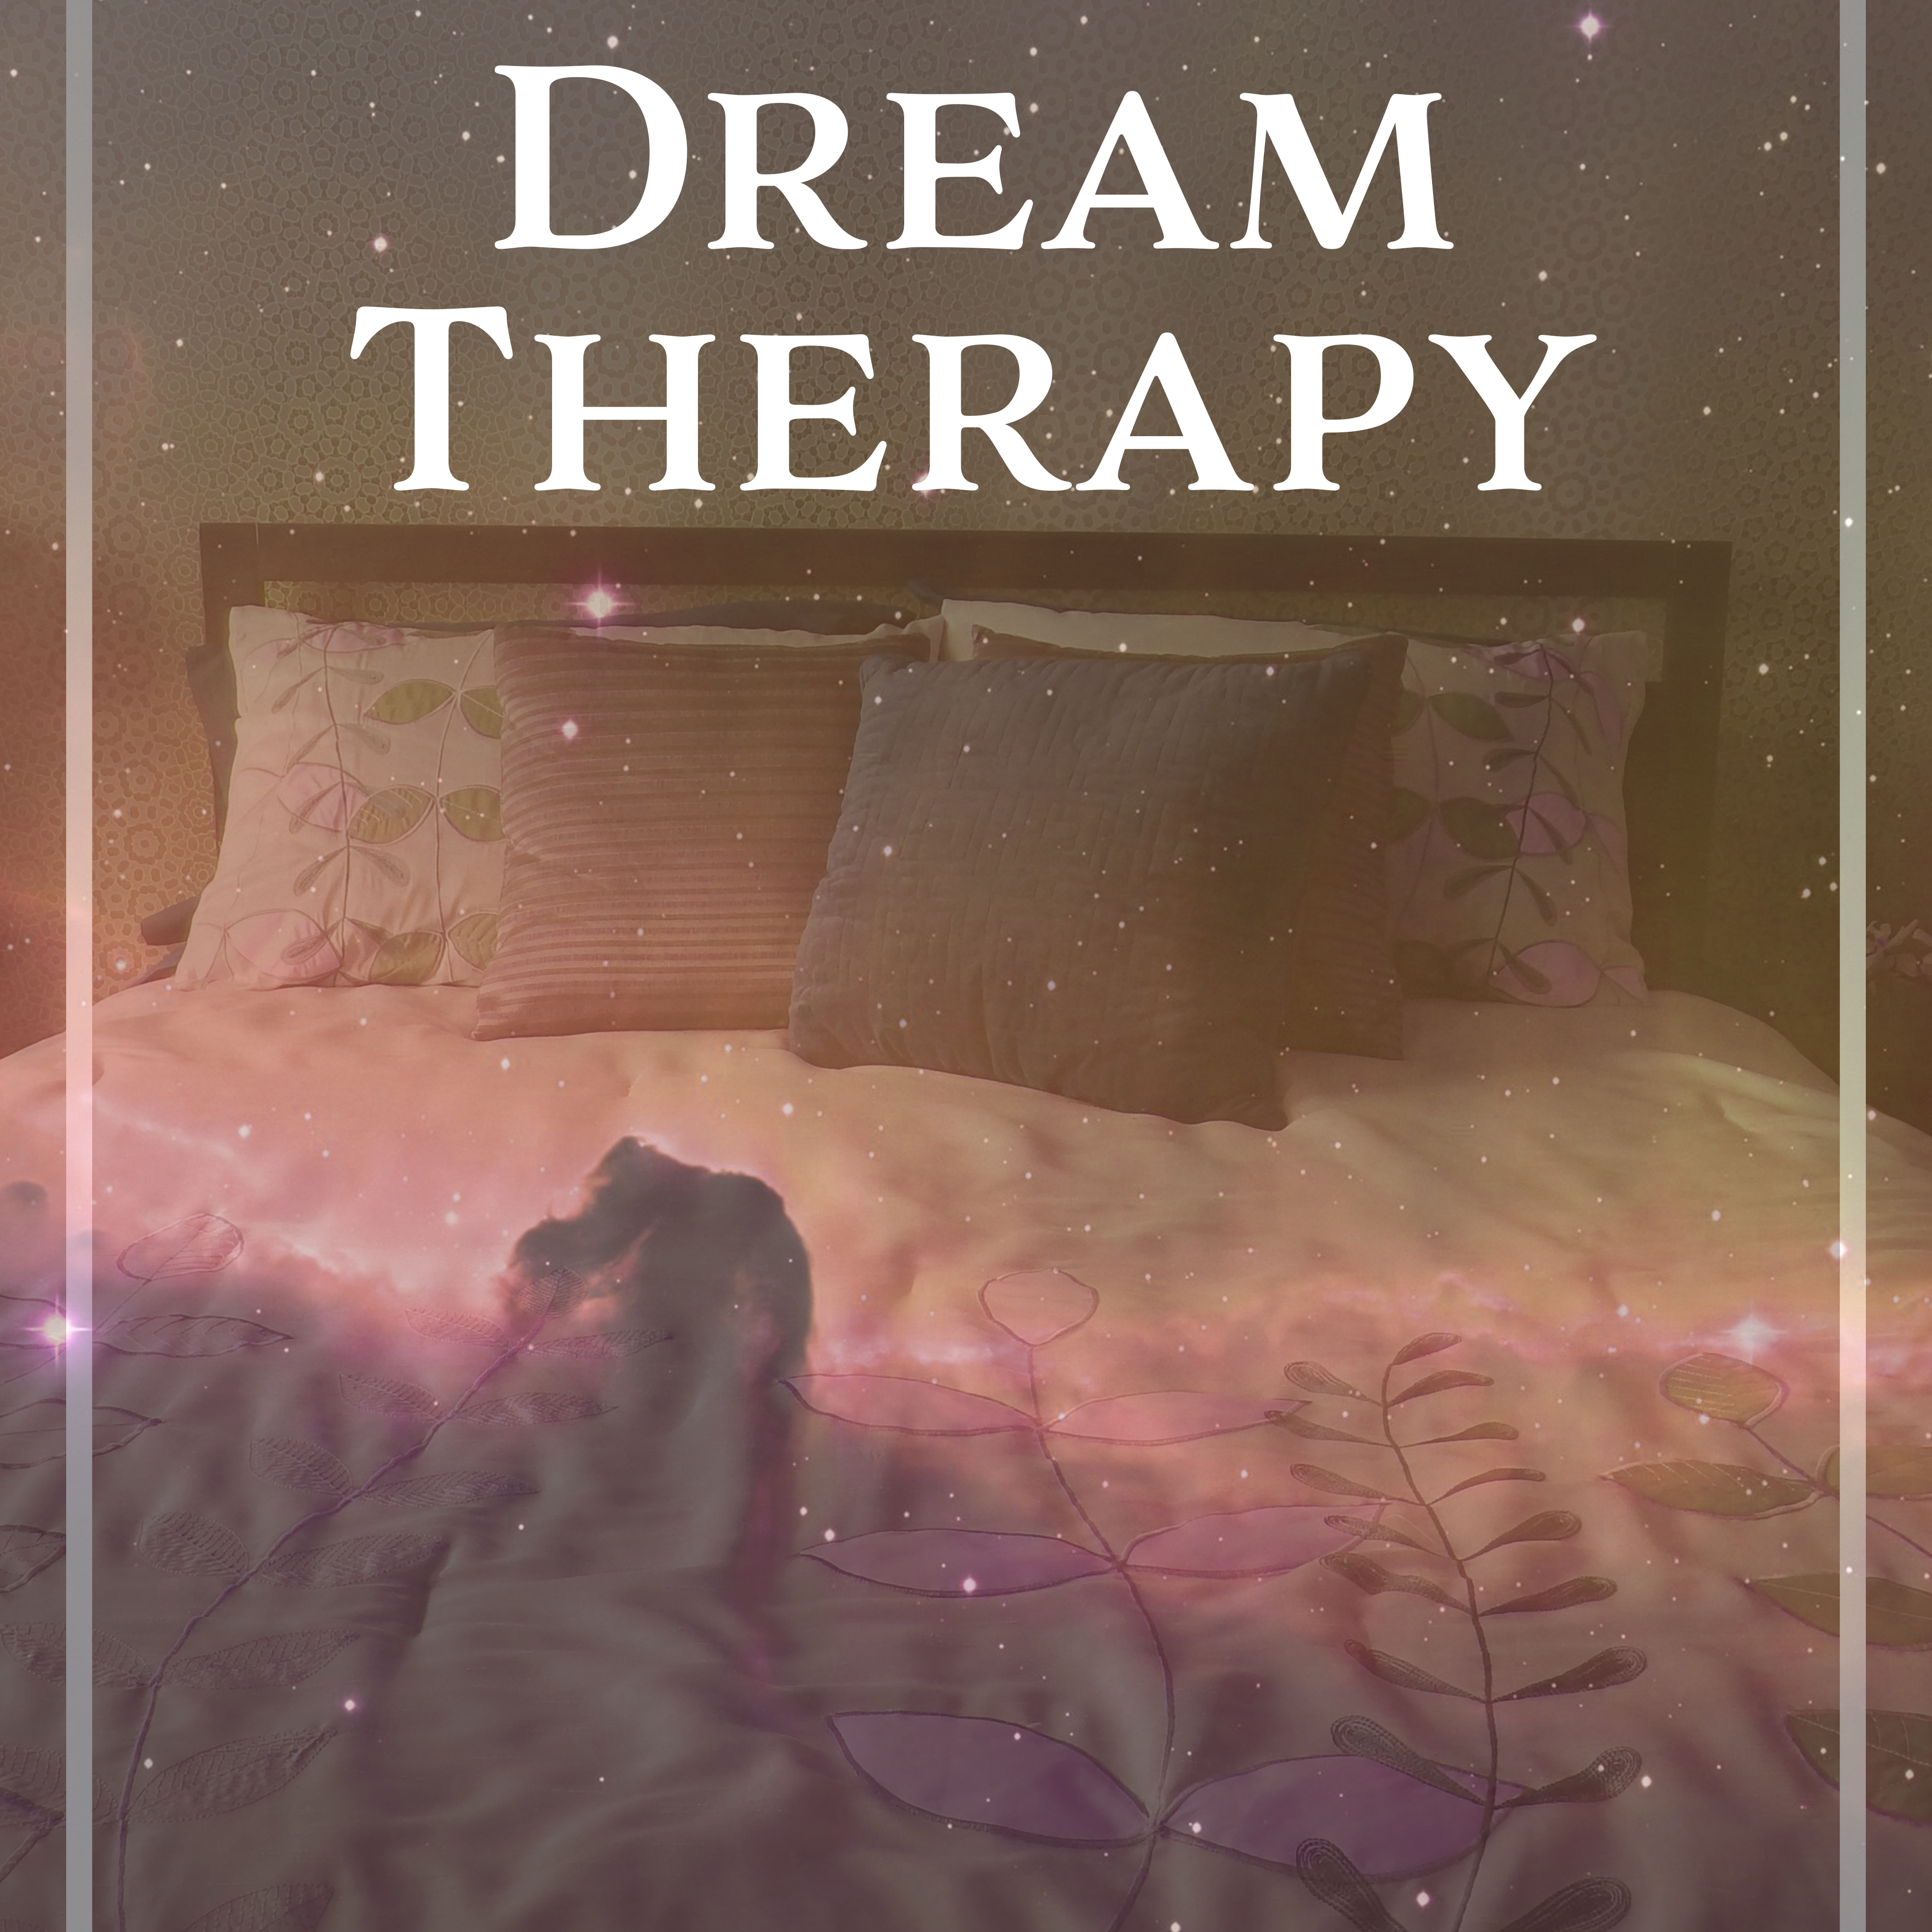 Dream Therapy – Music for Sleep, Pure Mind, Piano Music, Soothing Sounds, Deep Sleep, Calm Lullabies at Night